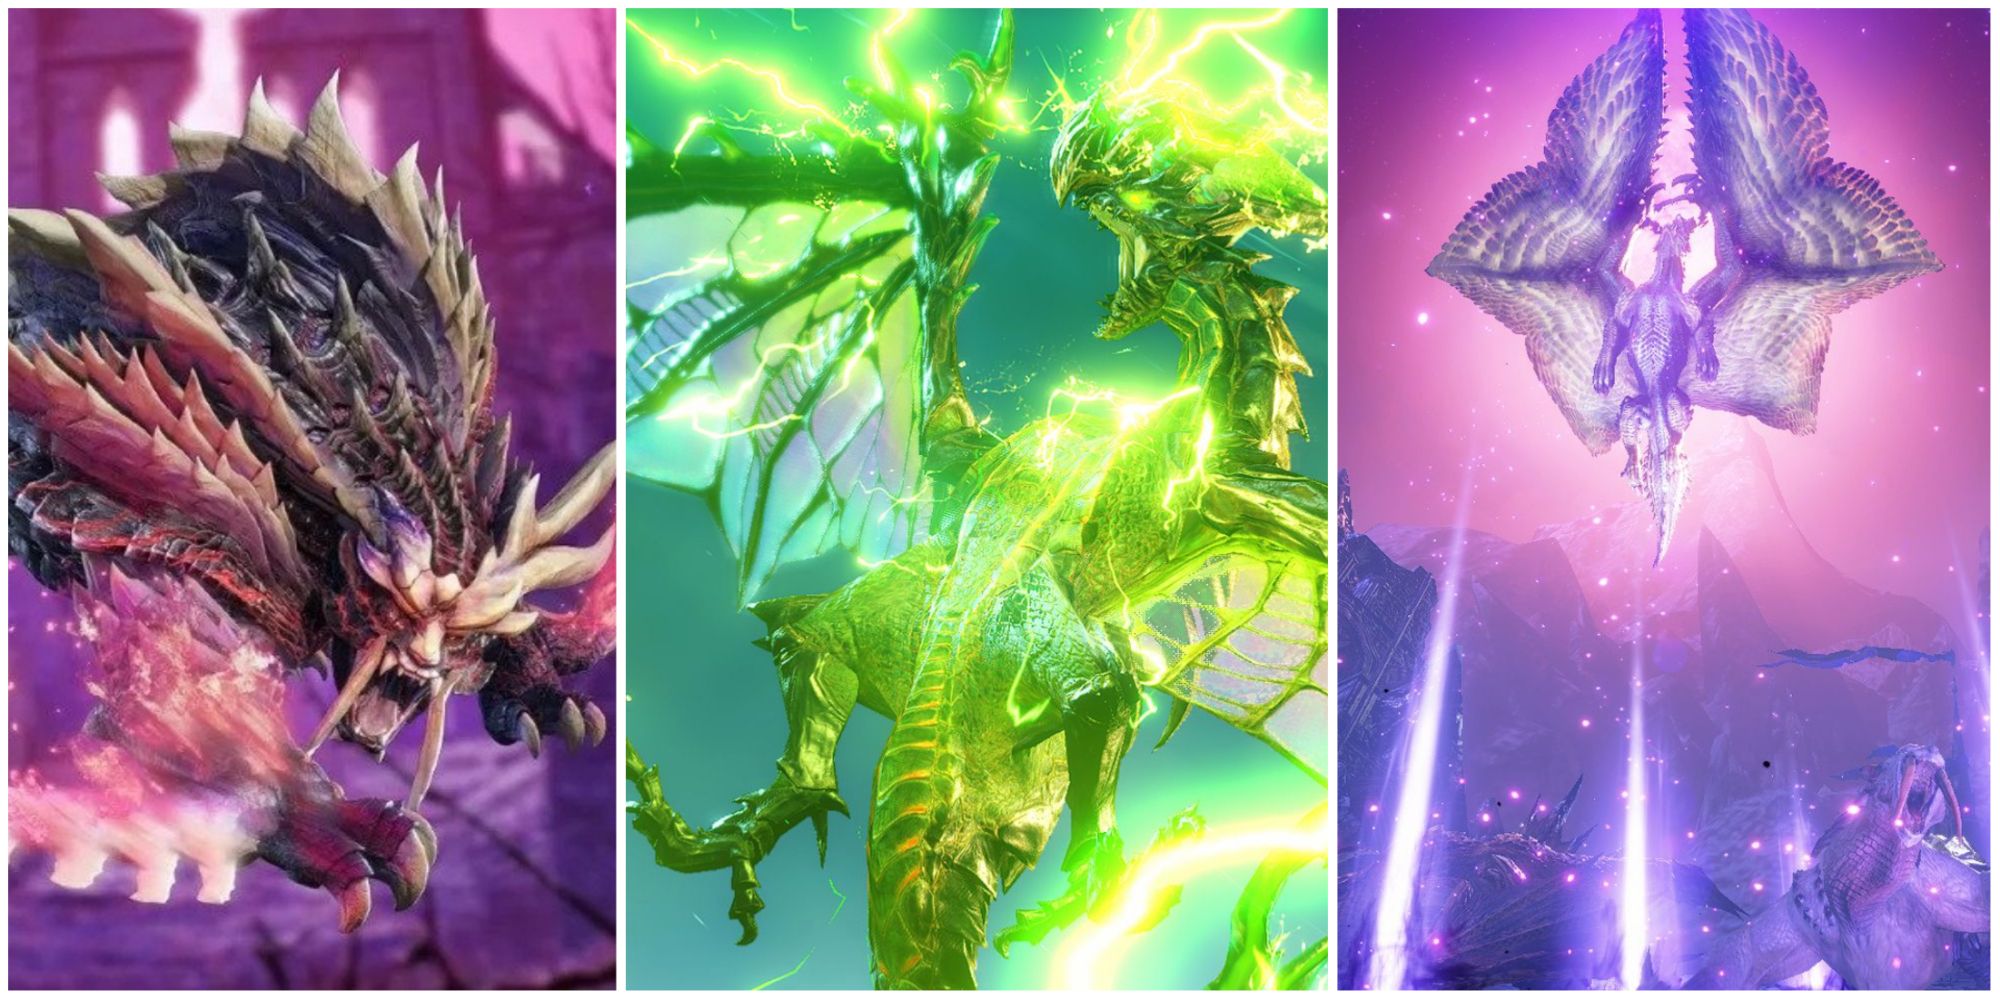 Scorned Magnamalo roaring, Astalos with green electricity pulsing around them, and Shagaru Magala in the air with their wings outstretched calling down purple beams